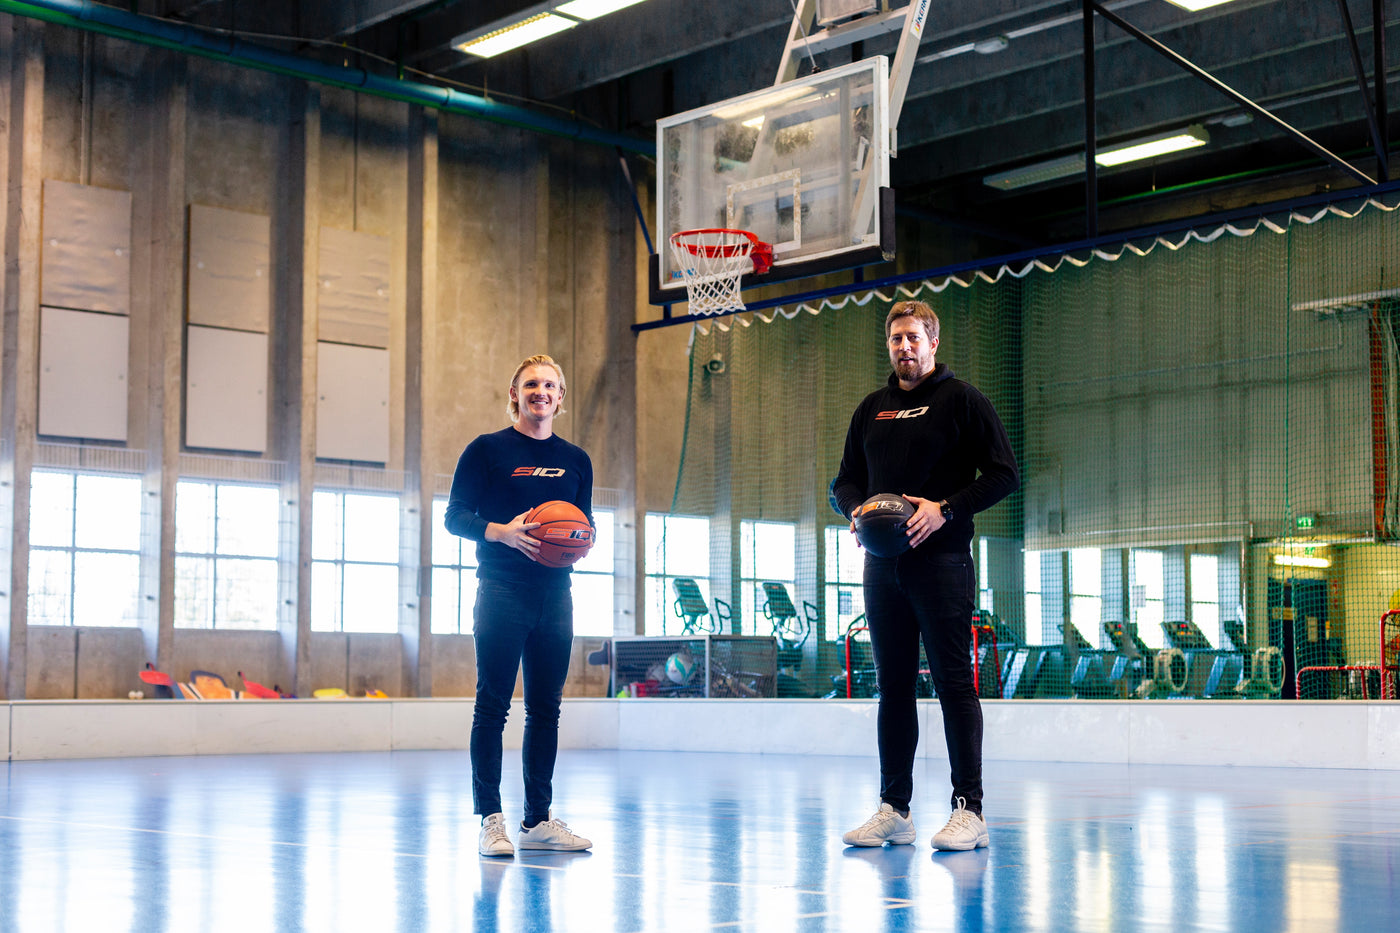 SIQ Basketball Announces $3 Million Fund Raise to Accelerate Growth and Drive National Expansion